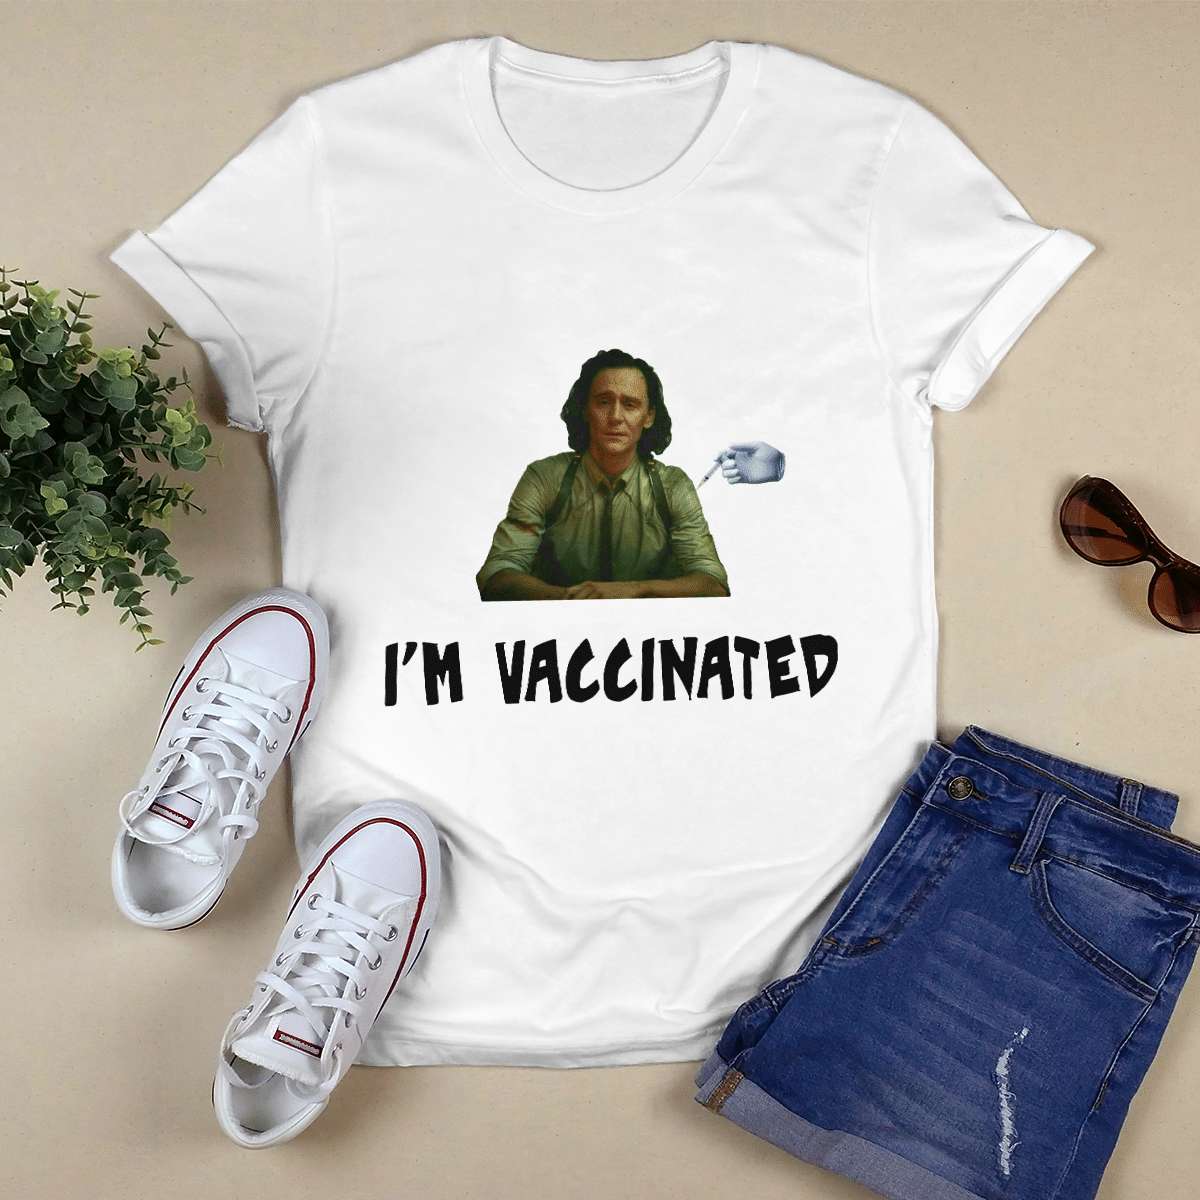 I'm vaccinated - Tom Hiddleston vaccinated, get vaccinated people